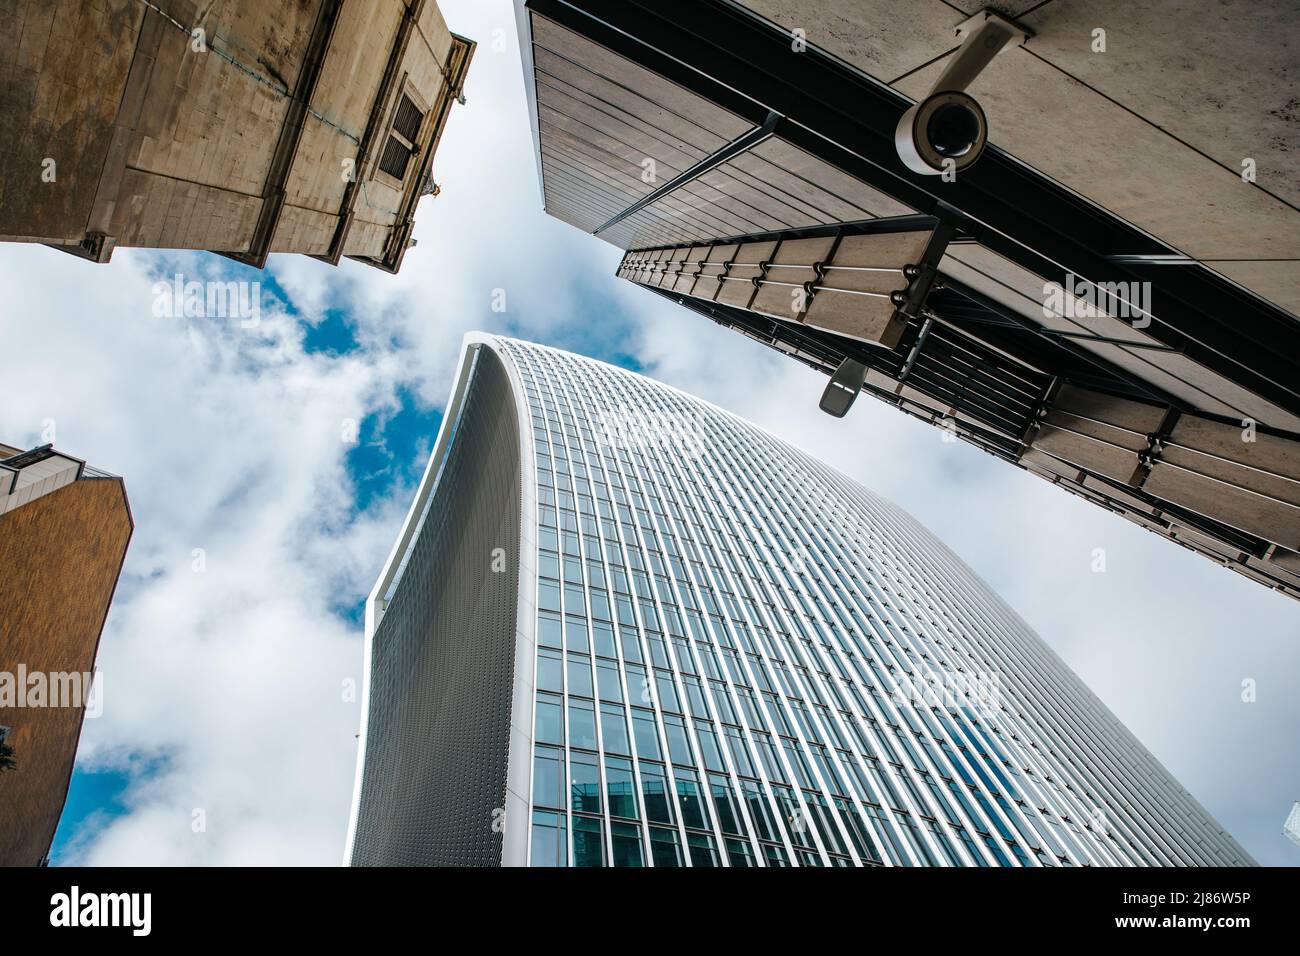 Looking up at Fenchurch Building, London Stock Photo